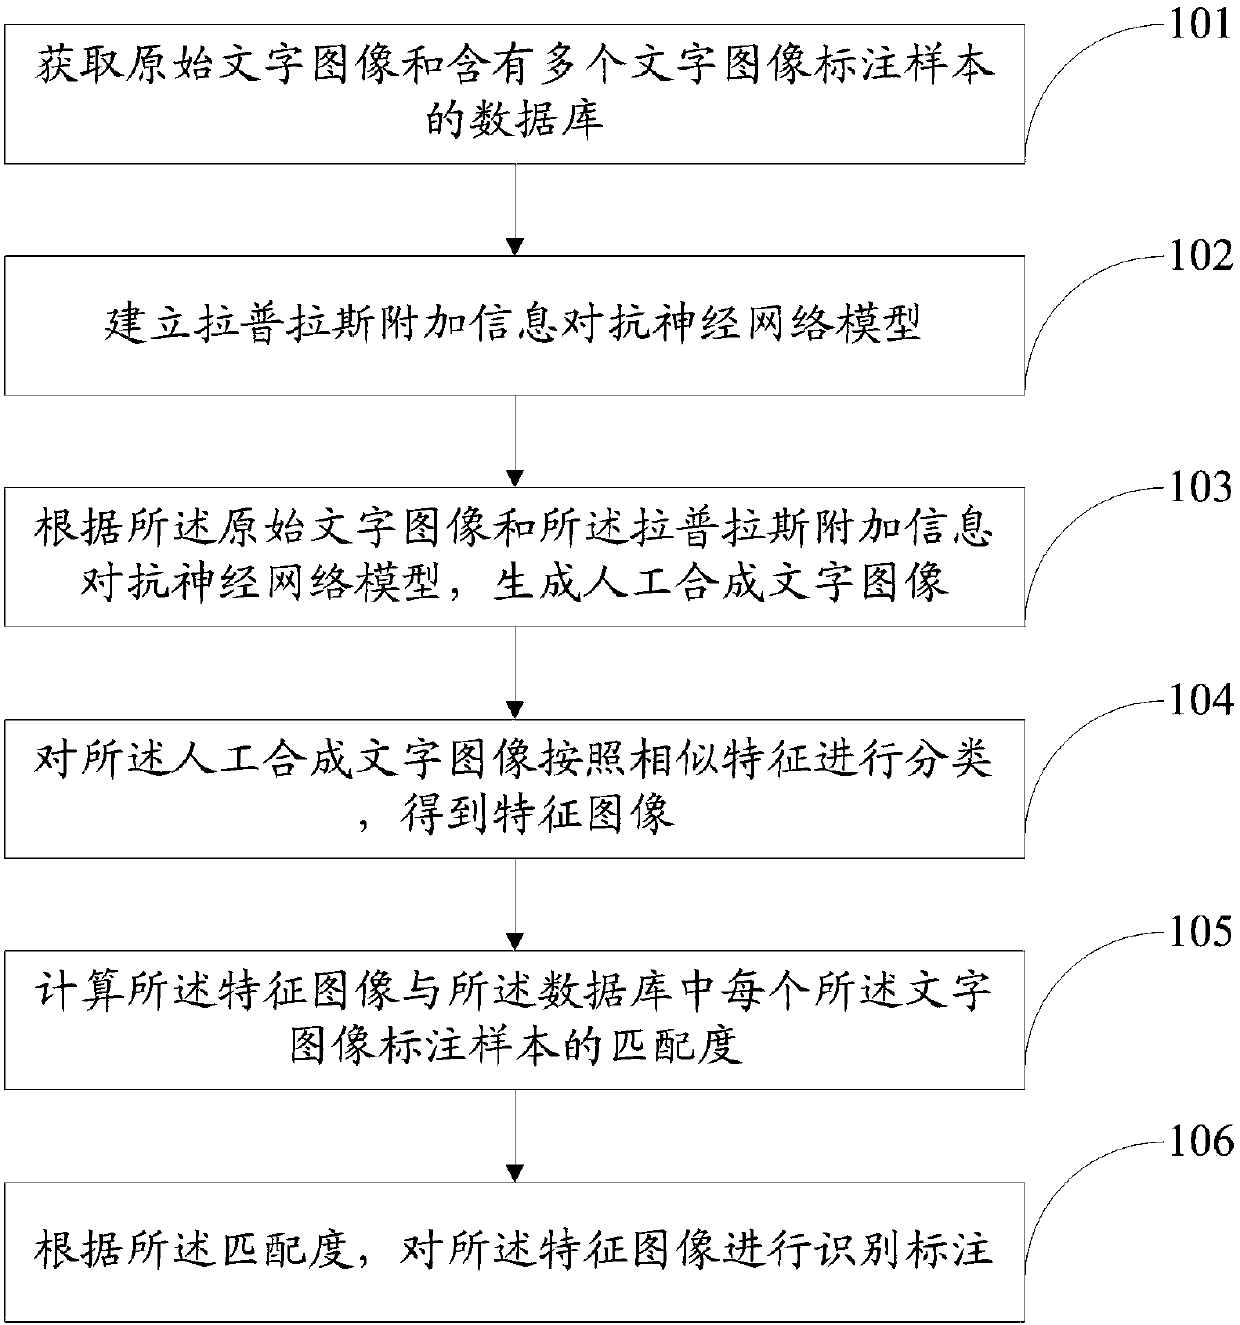 Character image identifying and labeling method and system